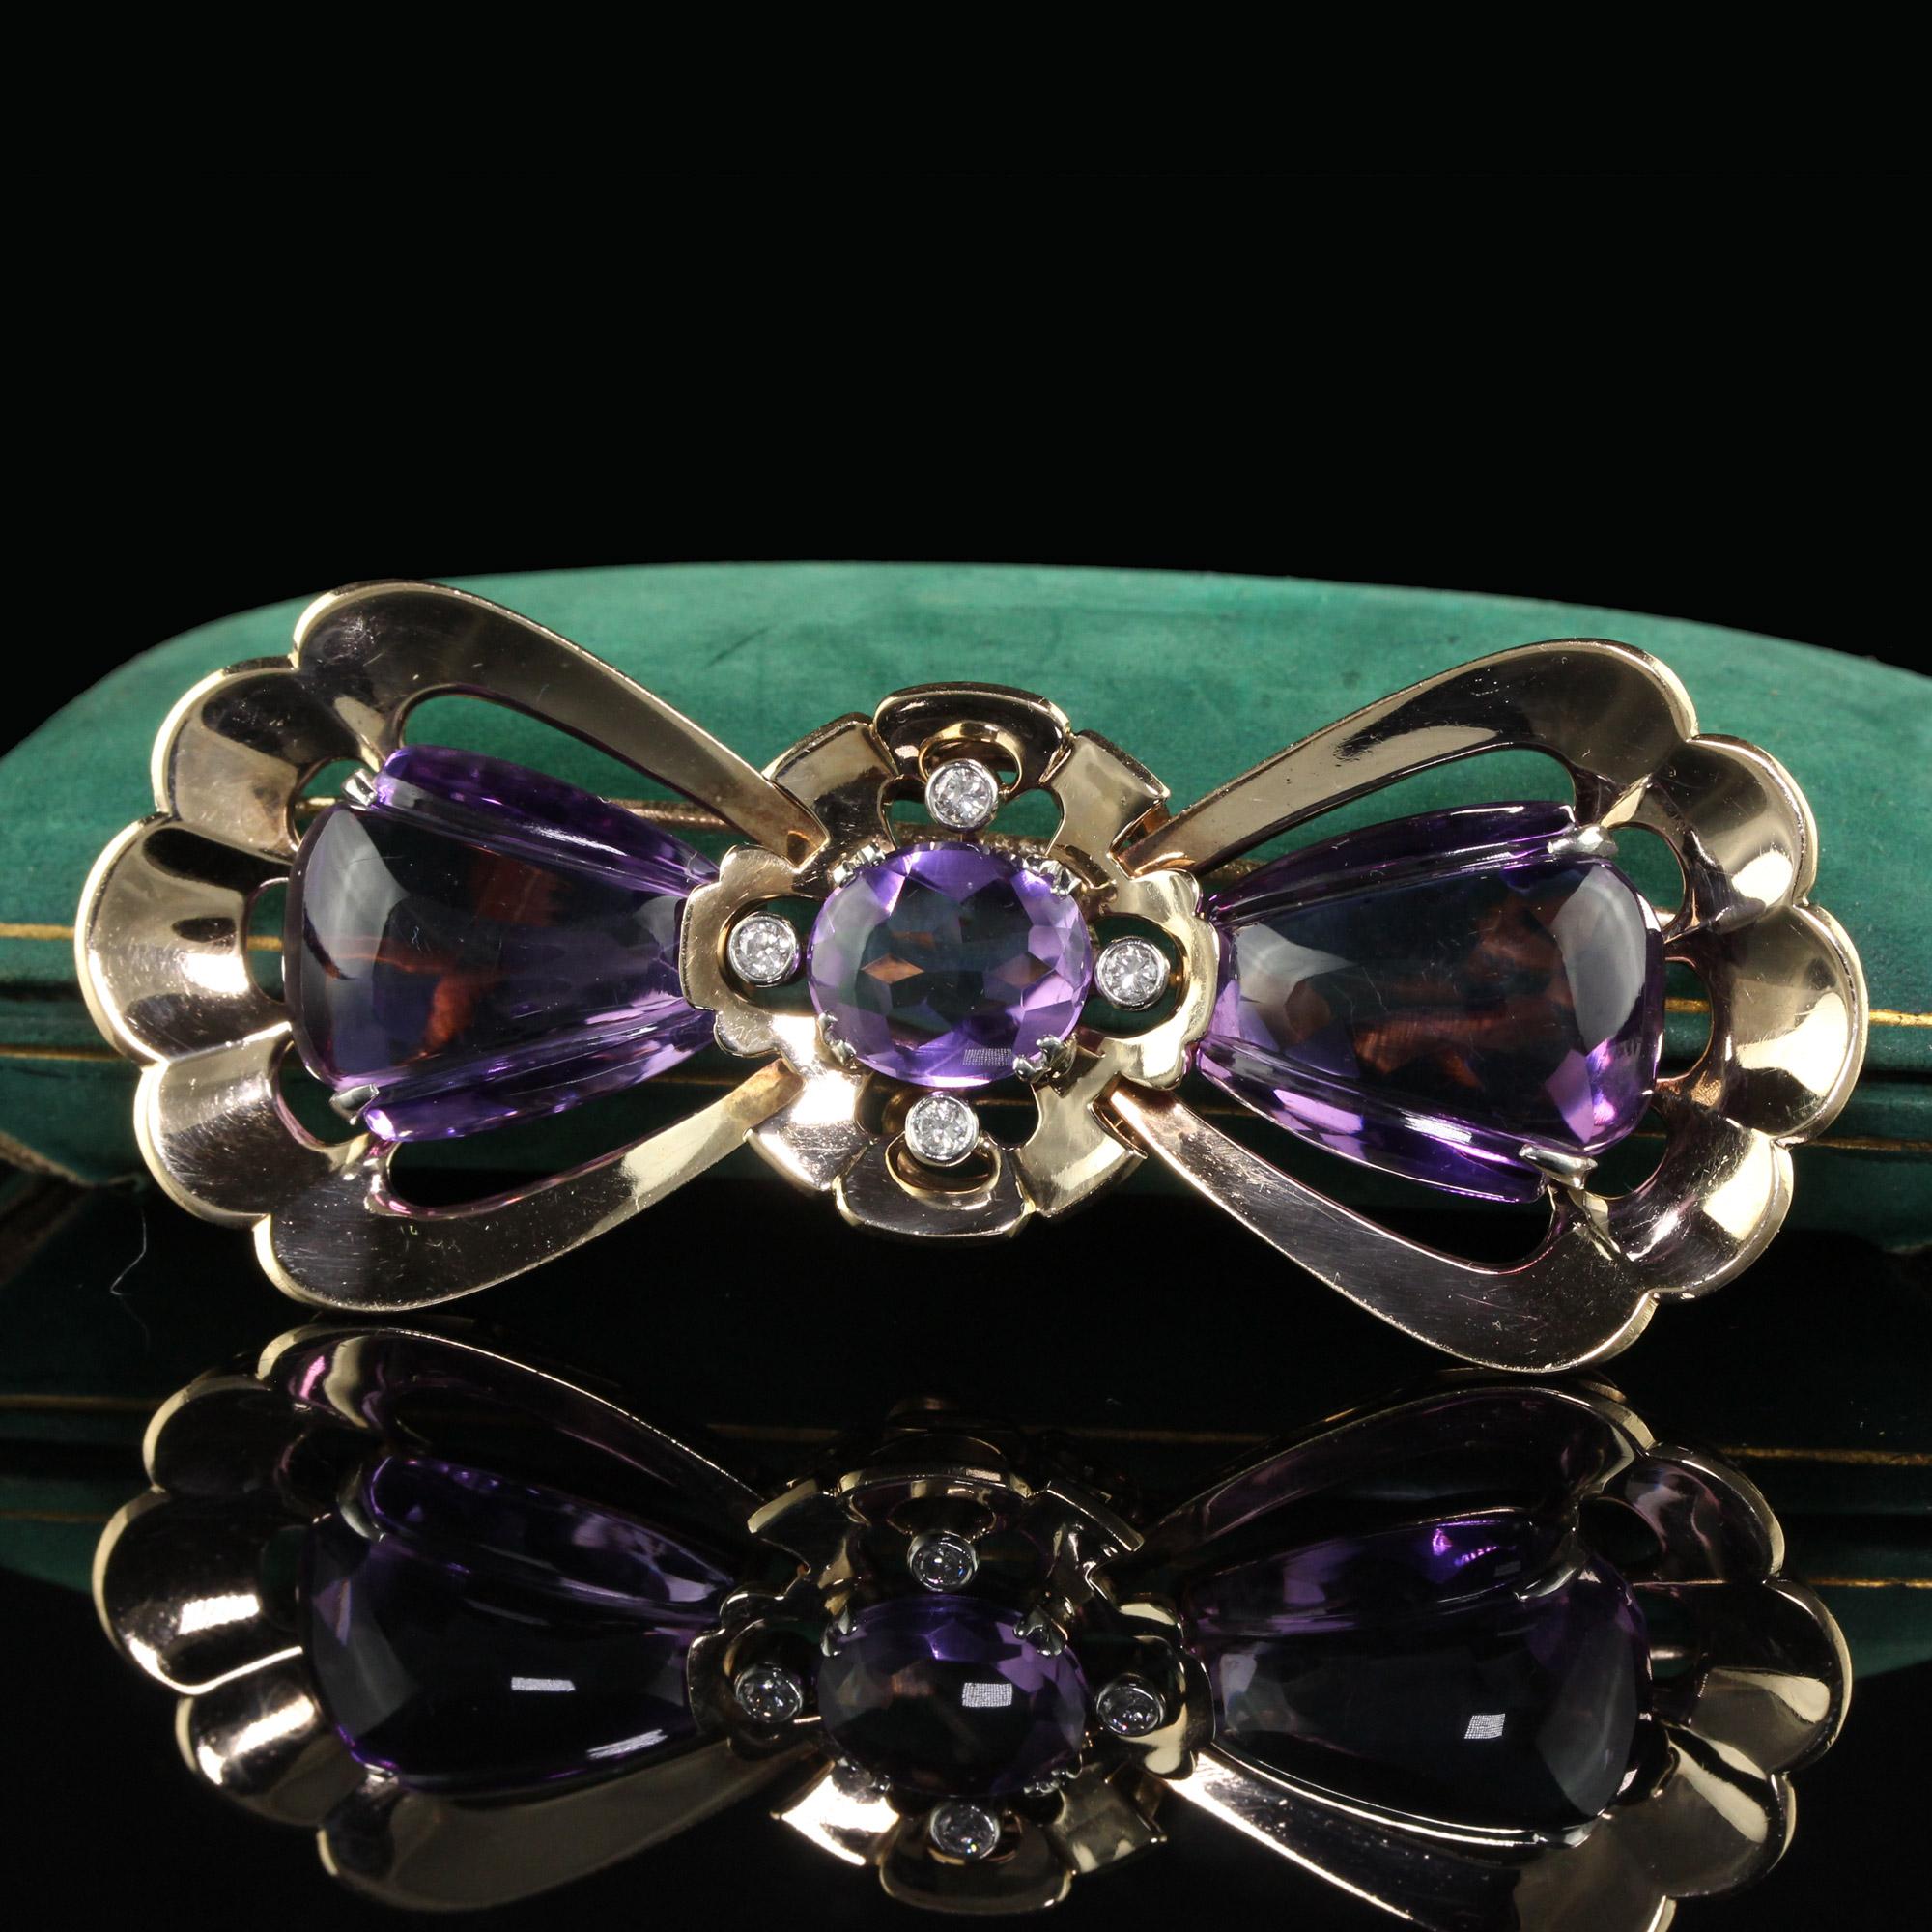 Beautiful Vintage Retro Tiffany and Co Carved Amethyst and Diamond Bow Pin Brooch. This incredible Tiffany and Co pin brooch is crafted in 14k yellow gold. The top of the pin has gorgeous carved purple amethyst set into it. There are diamonds set